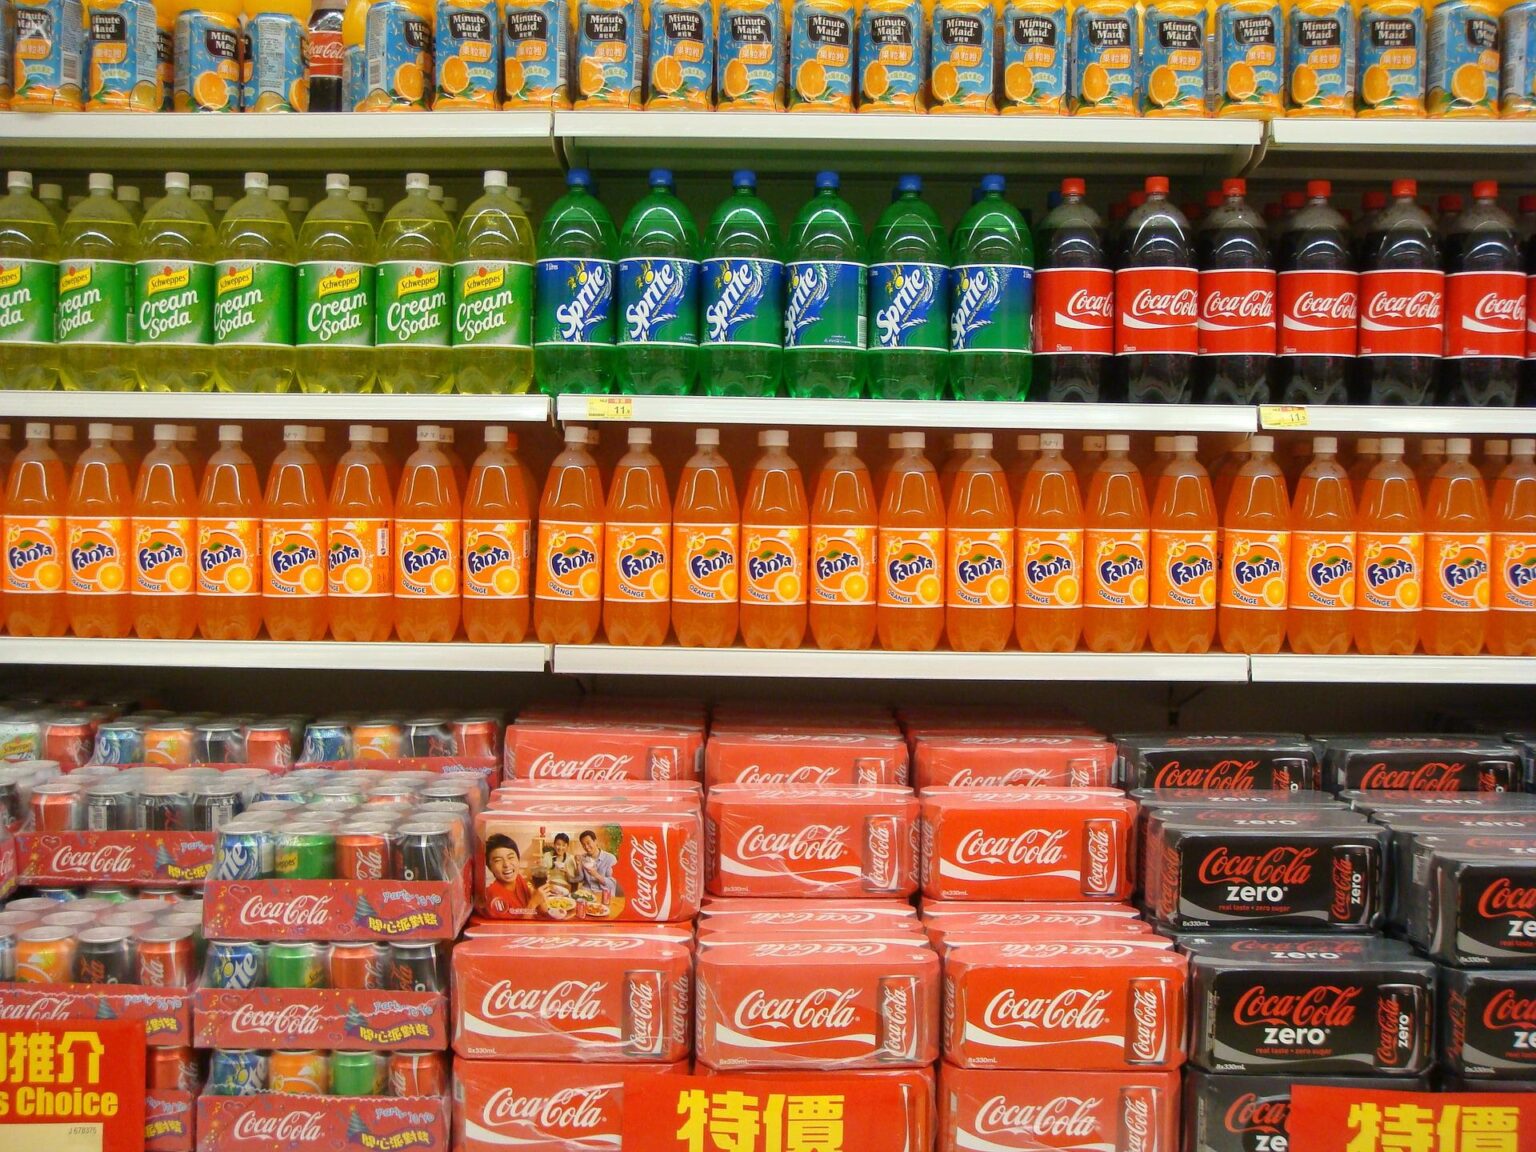 Sweetened beverage taxes produce net economic benefits for lower-income communities